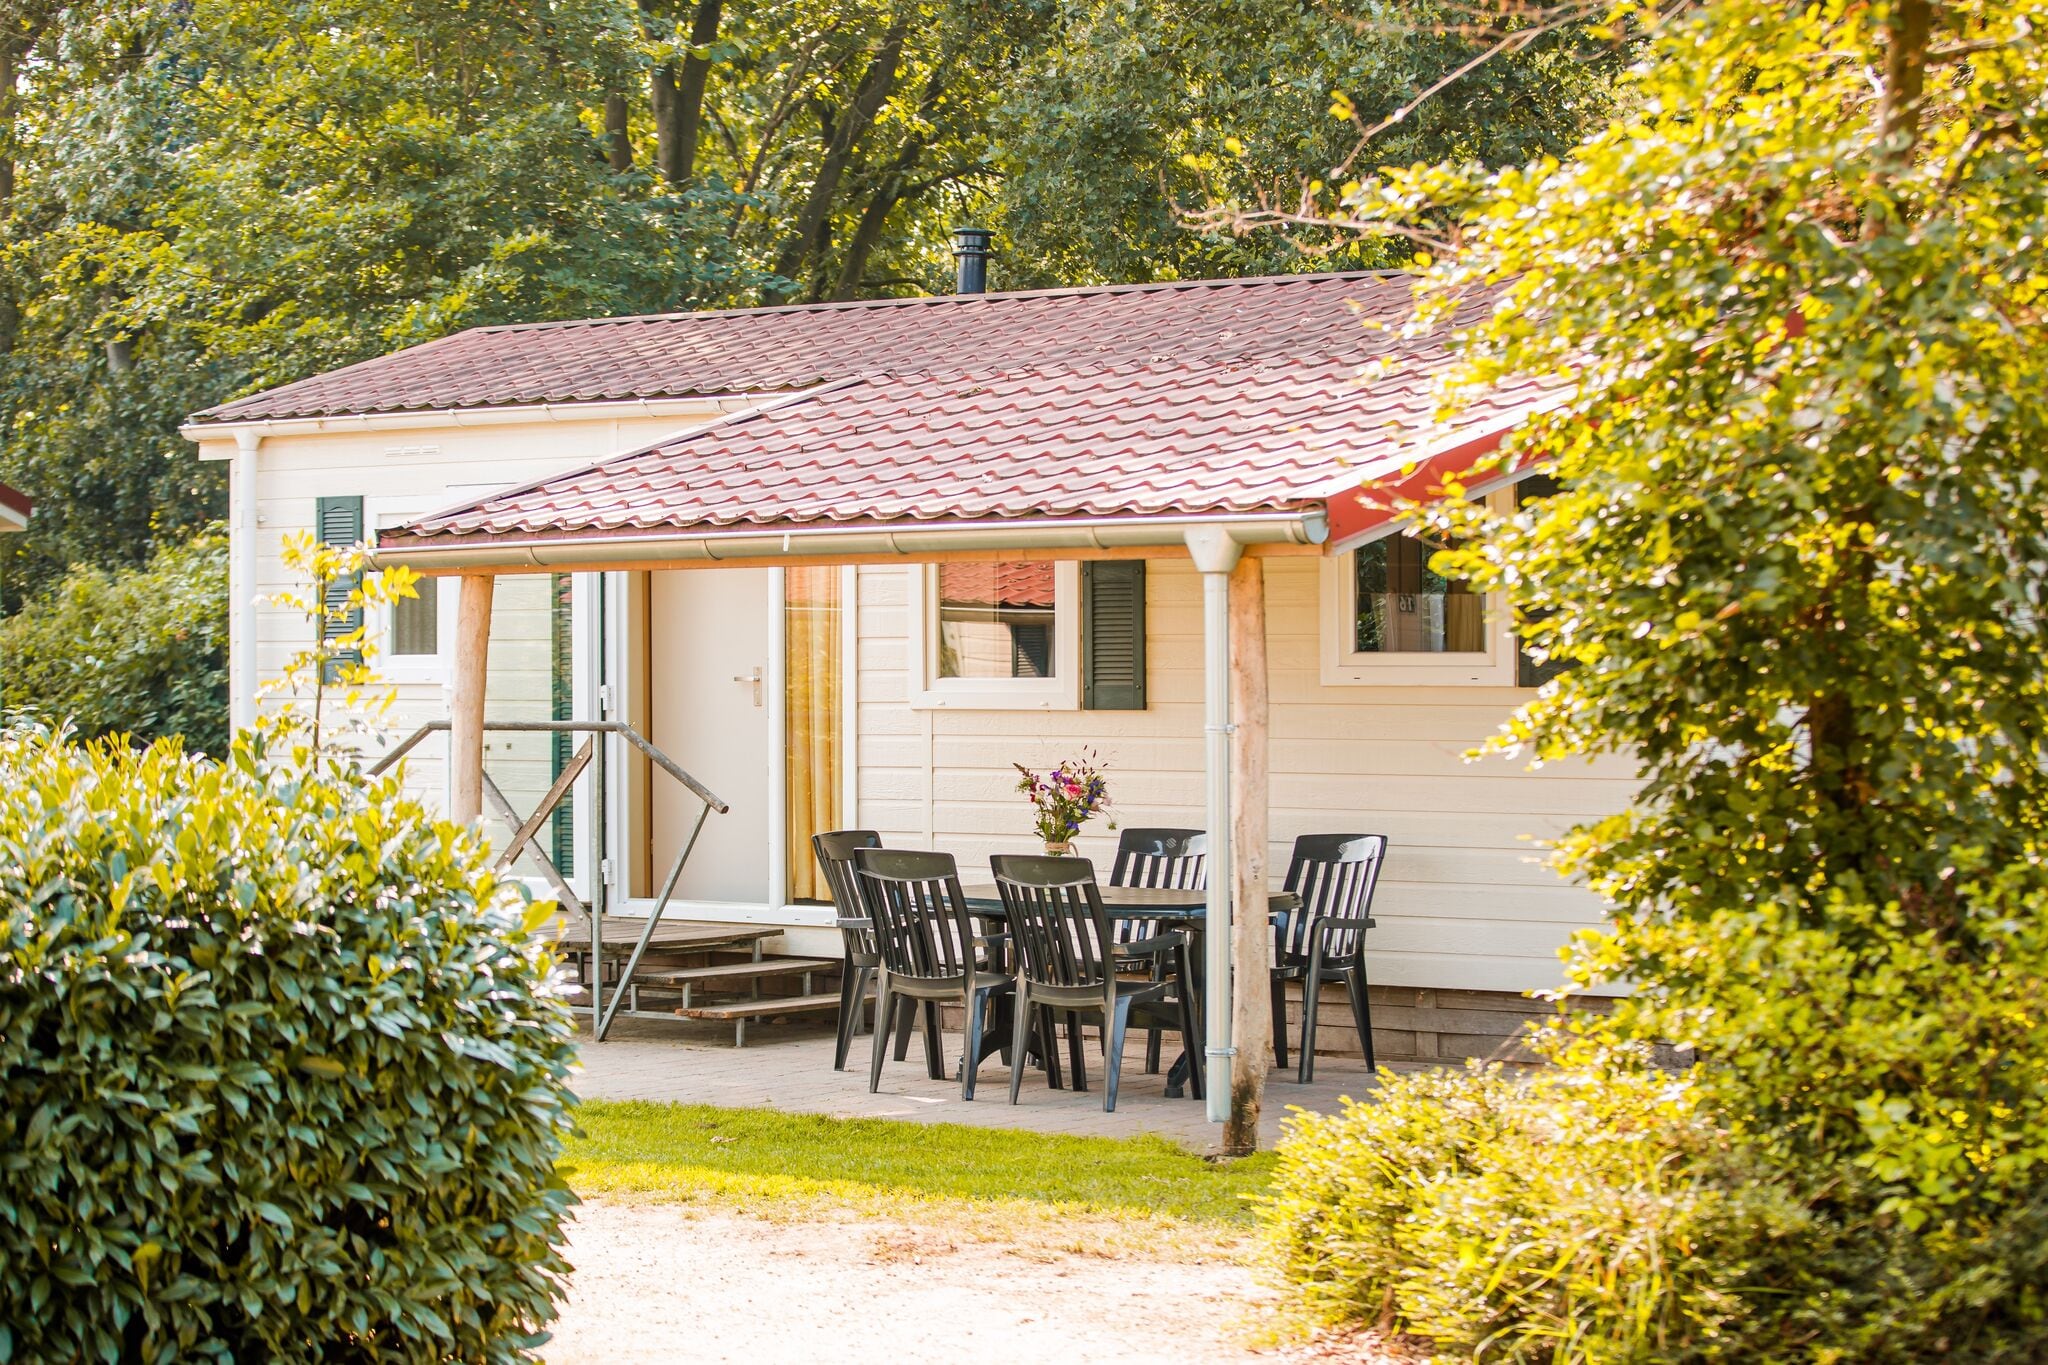 Nice chalet with covered terrace at a holiday park on the Leukermeer